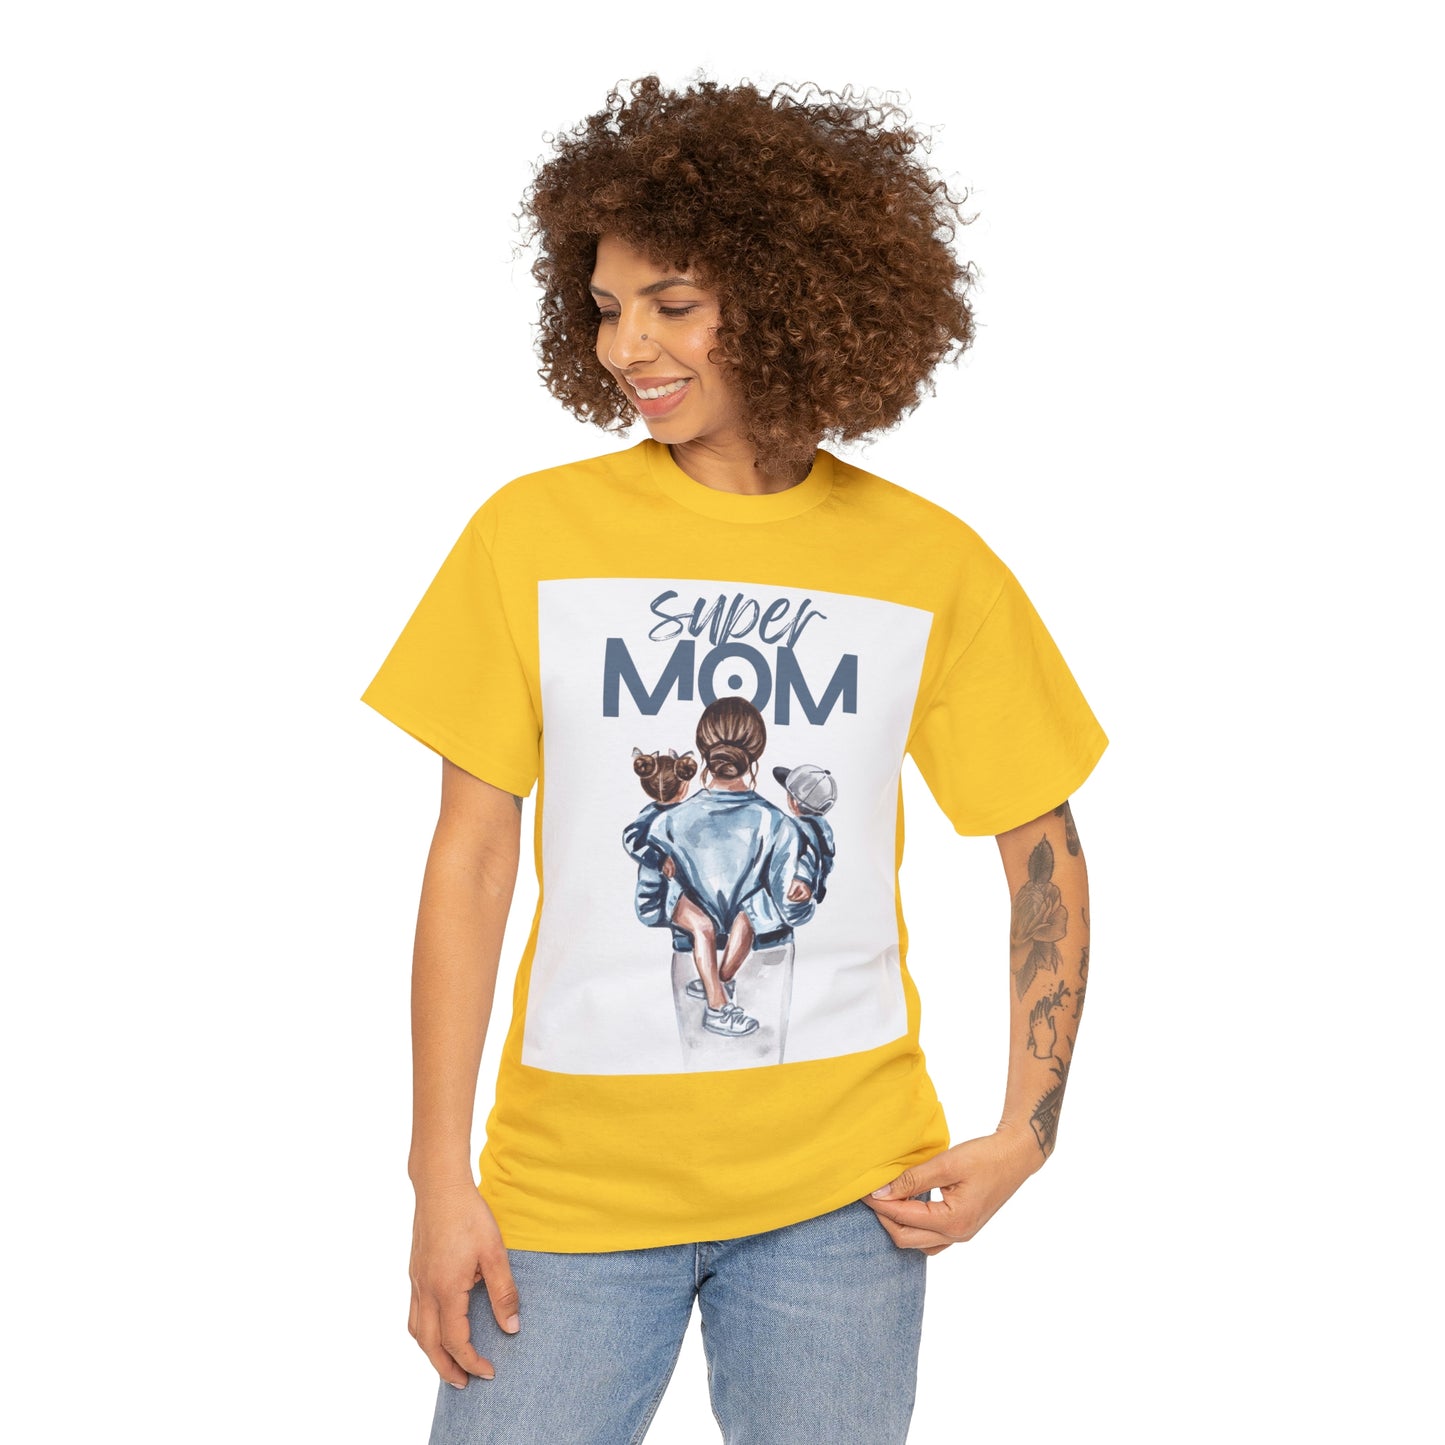 Super mom Your Style  Our Custom Printed Tee Unique Design Comfortable Fit  Personalized  You.  color, funny tshirt tee shirt gift mothers